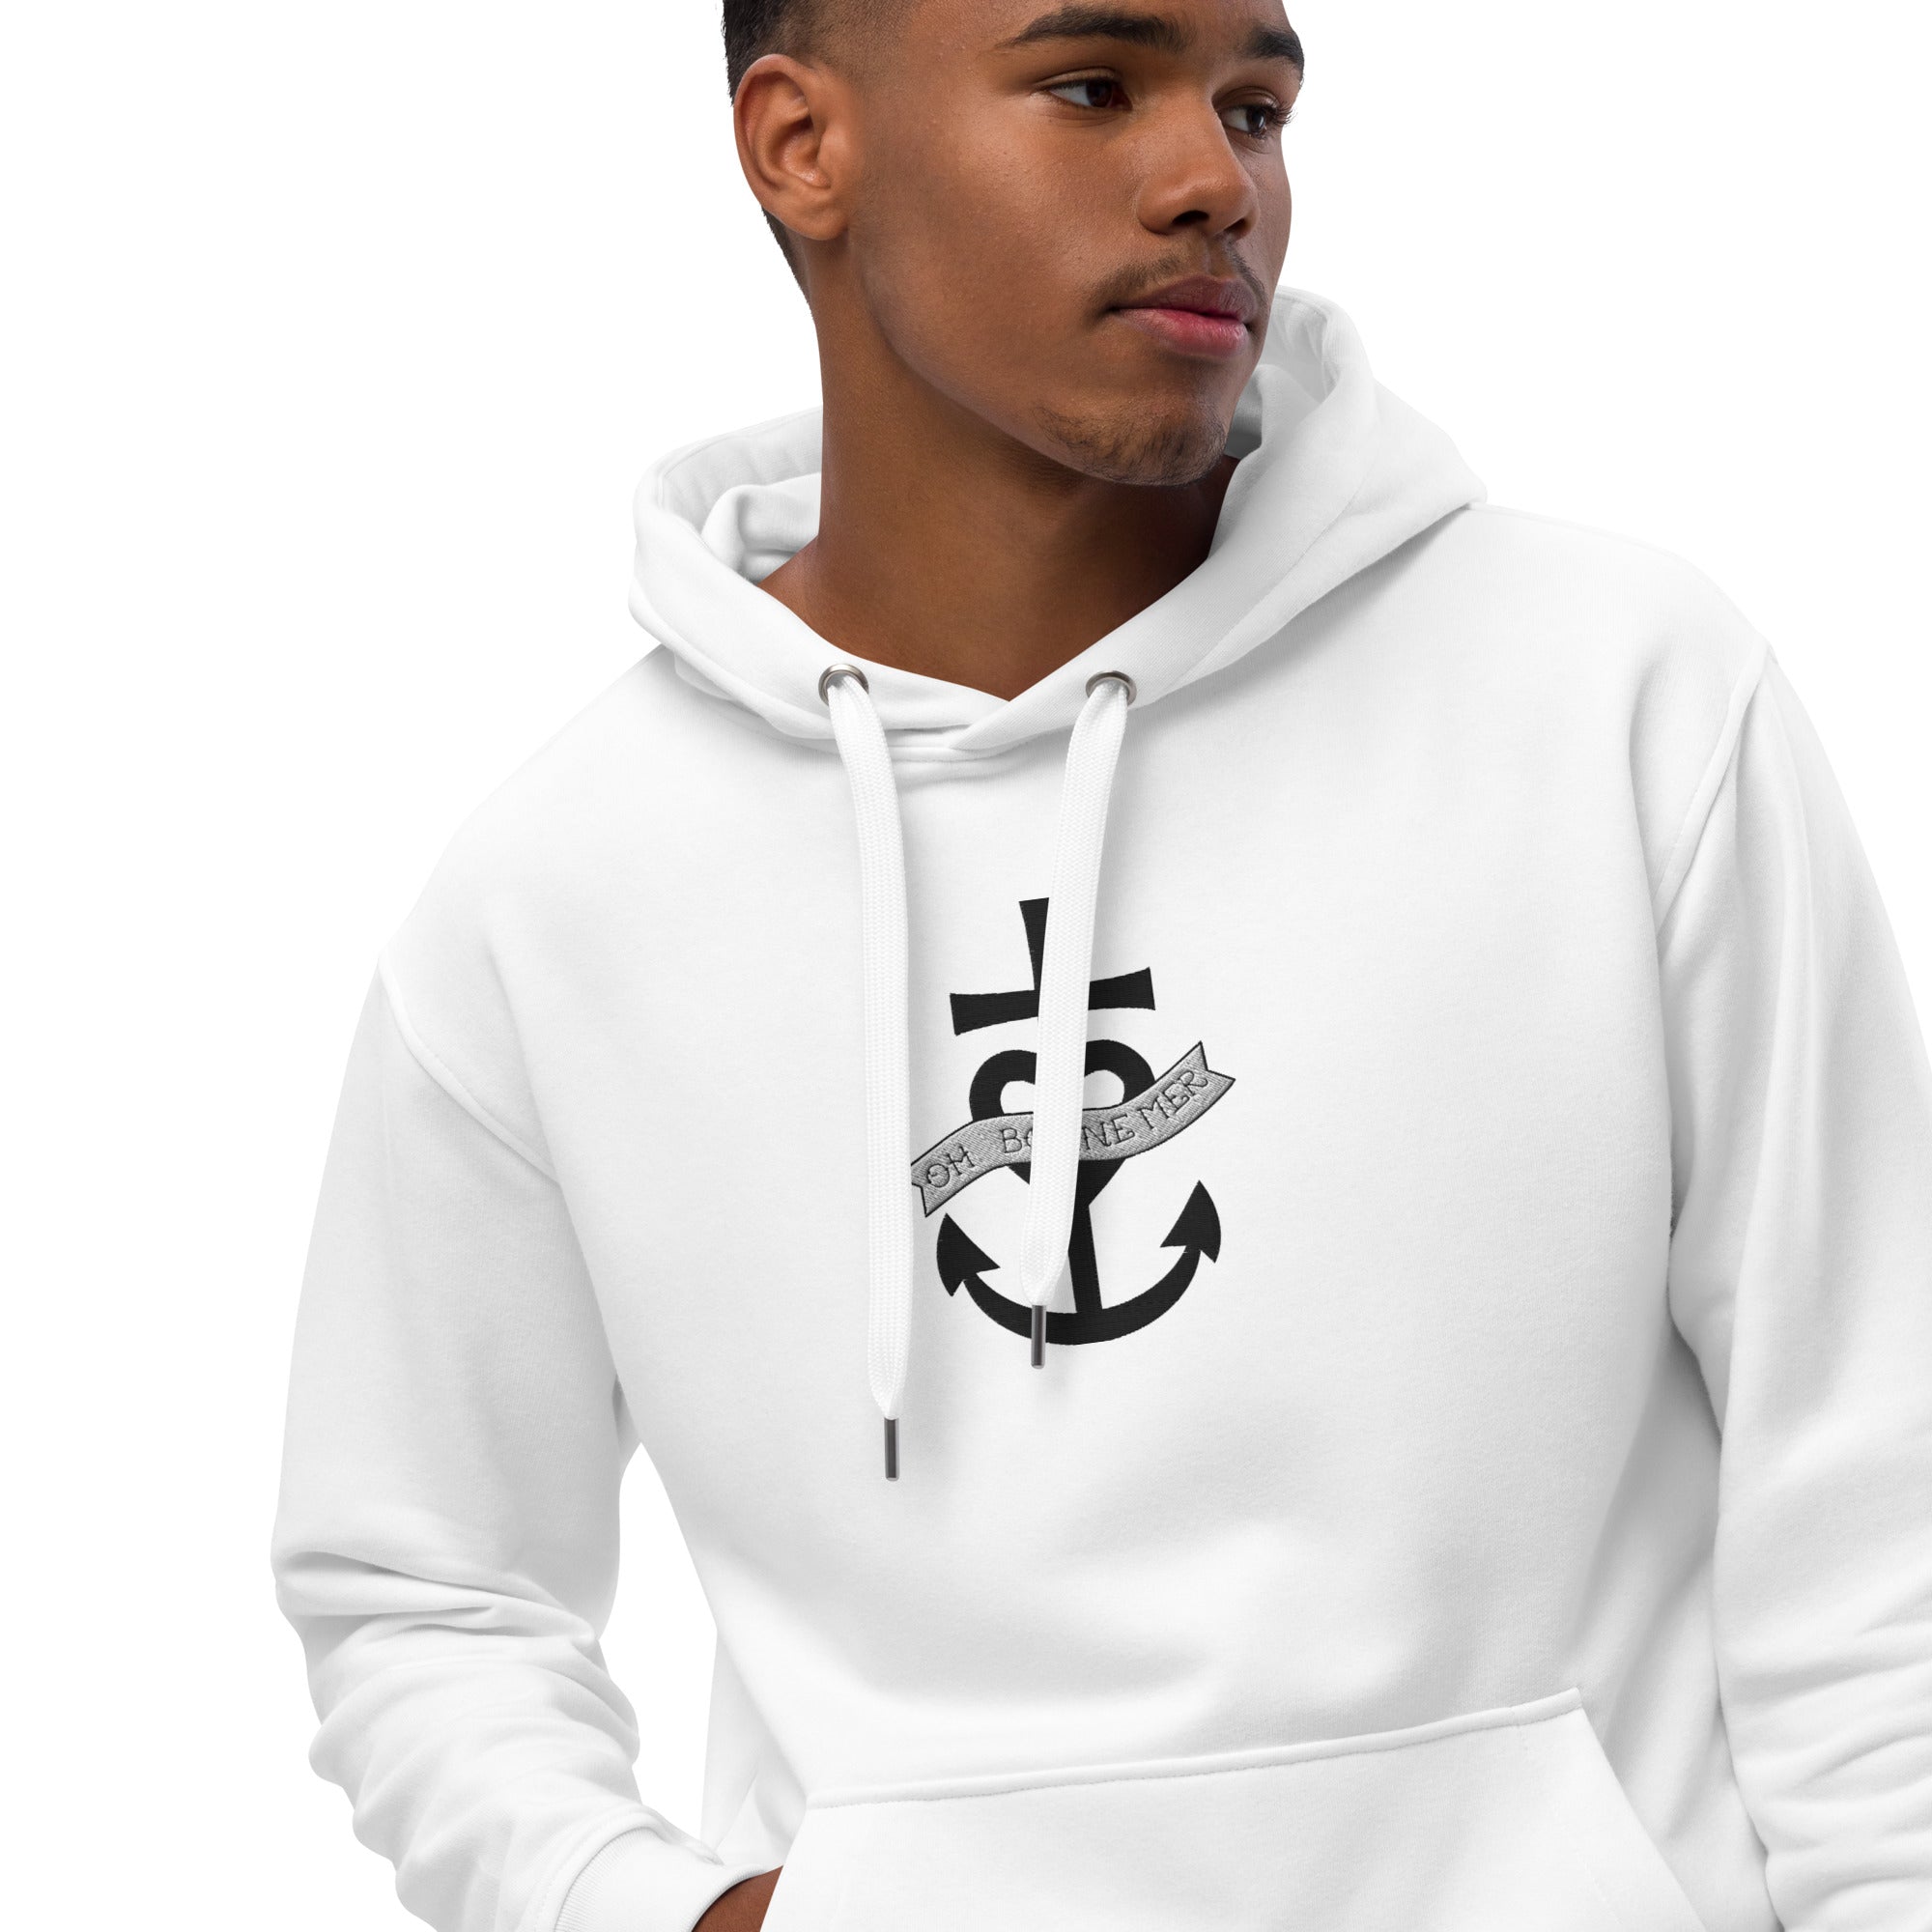 Premium eco hoodie Oh Bonne Mer 1 large embroided pattern on front